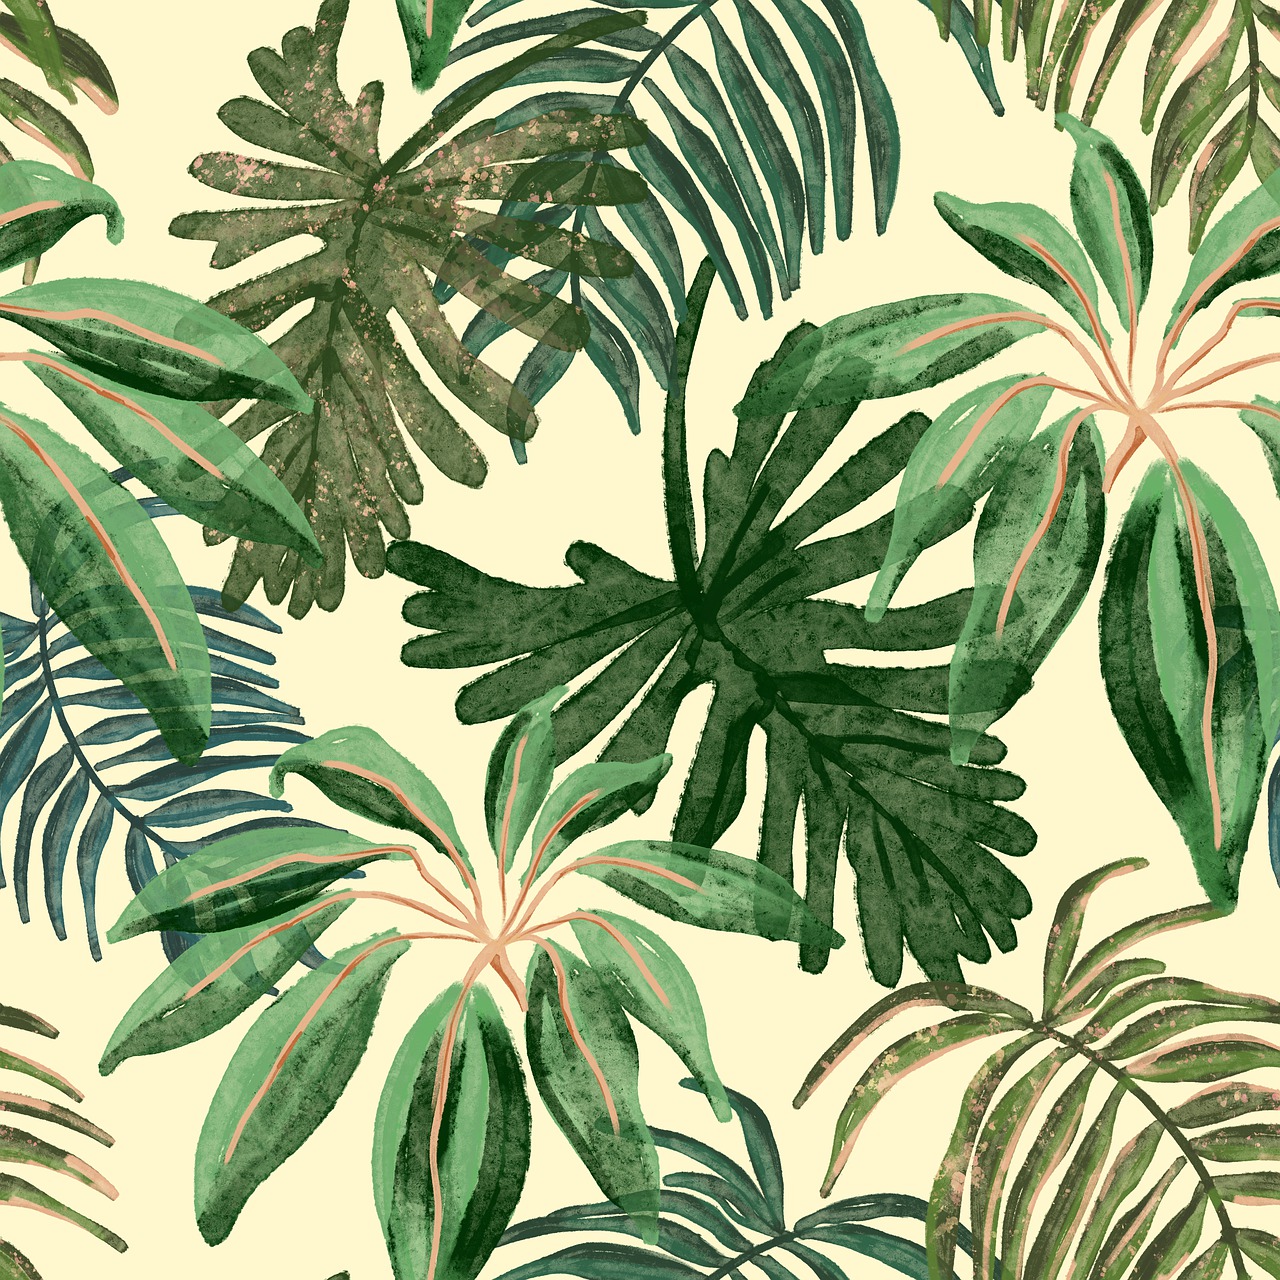 a watercolor painting of tropical leaves on a yellow background, a picture, seamless pattern, vintage shading, shades of green, full color illustration